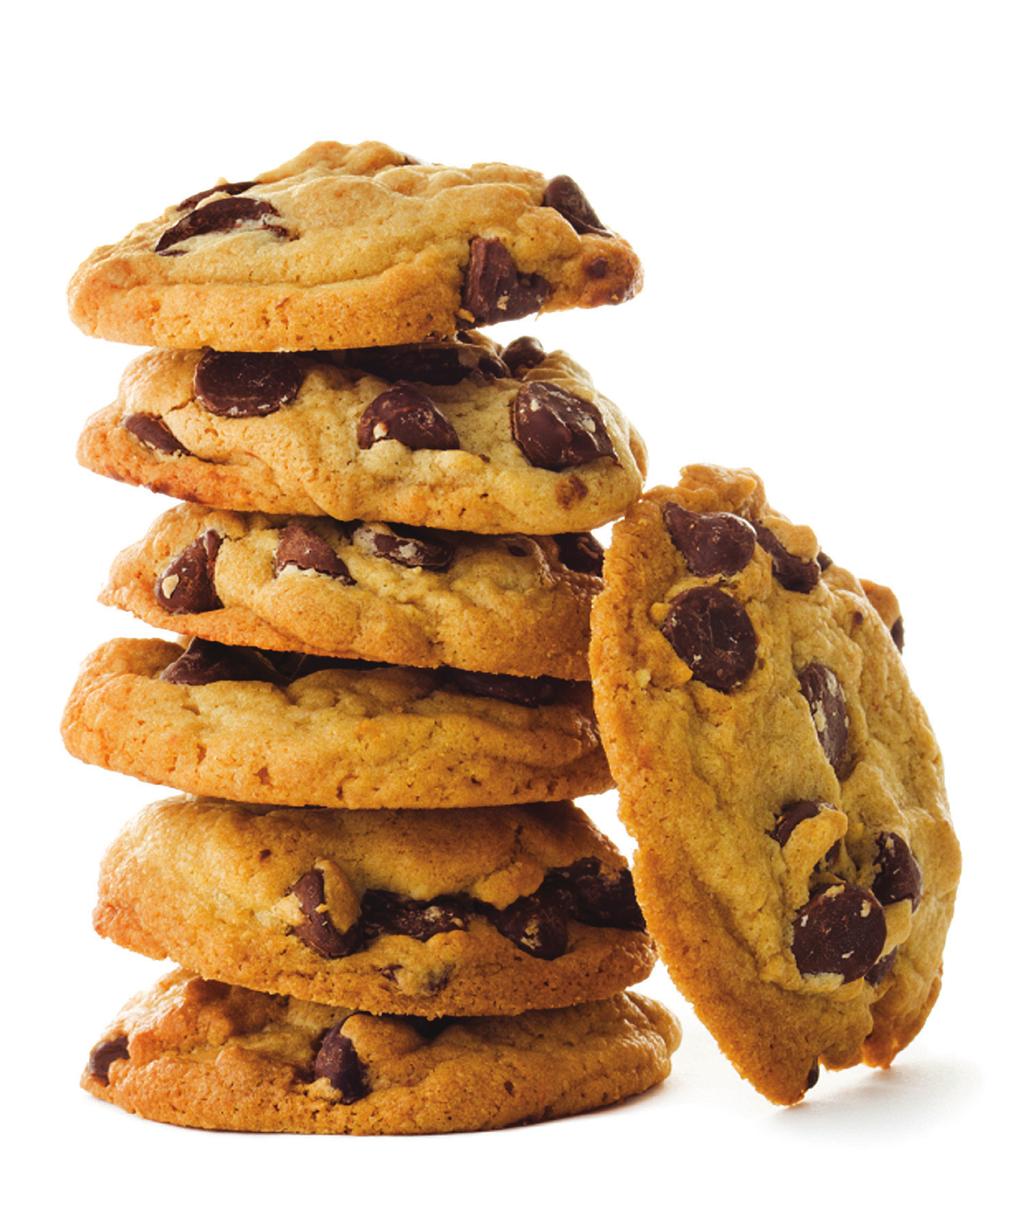 CHOCOLATE CHIP COOKIES > CHOCOLATE CHIP COOKIES > Chocolate Chip Cookies Preparation Time: 10 minutes Bake Time: 8 minutes Serving Size: 24 Cookies ½ cup Brown Sugar ¼ cup Sugar ¼ cup Butter 1 Egg 1